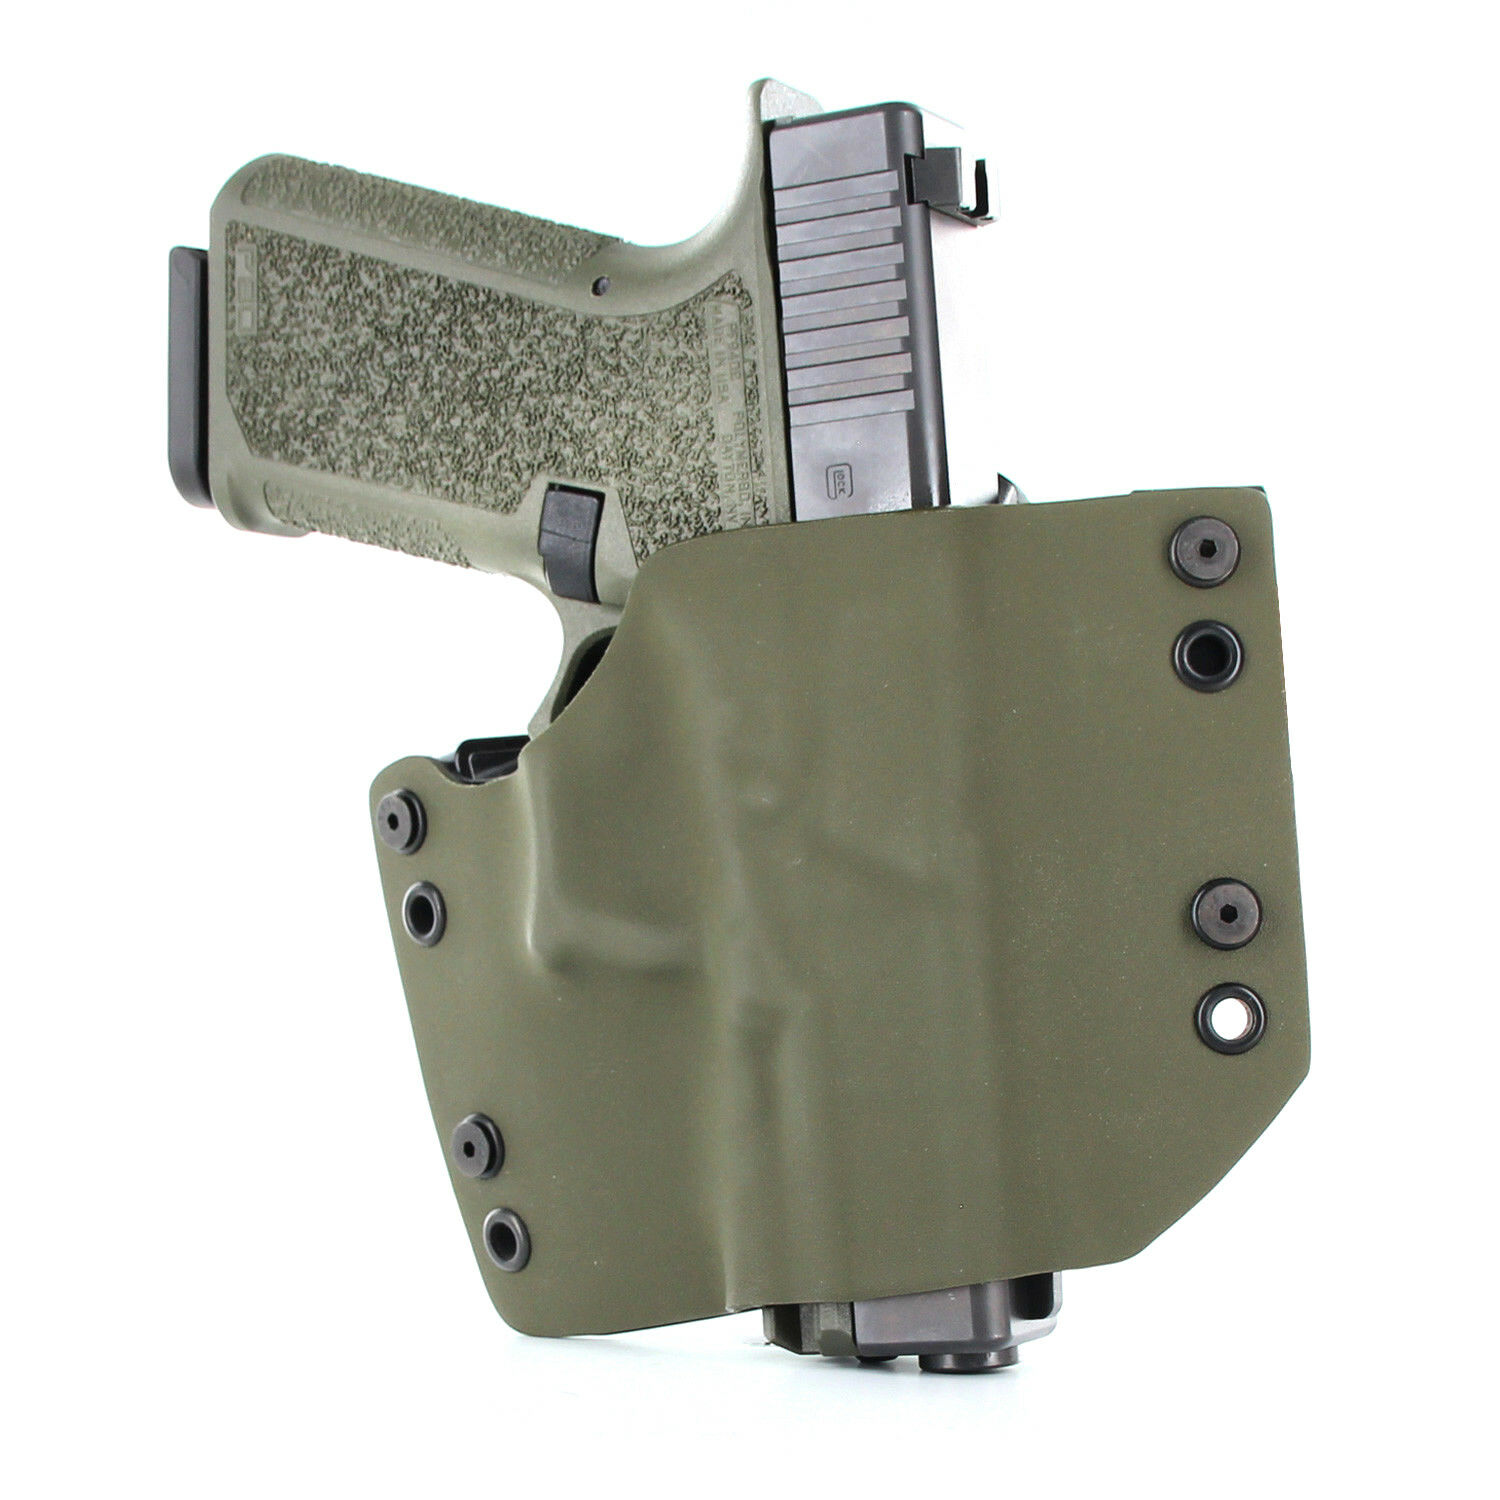 R&R HOLSTERS: OWB Kydex Holster compatible with Glock handguns